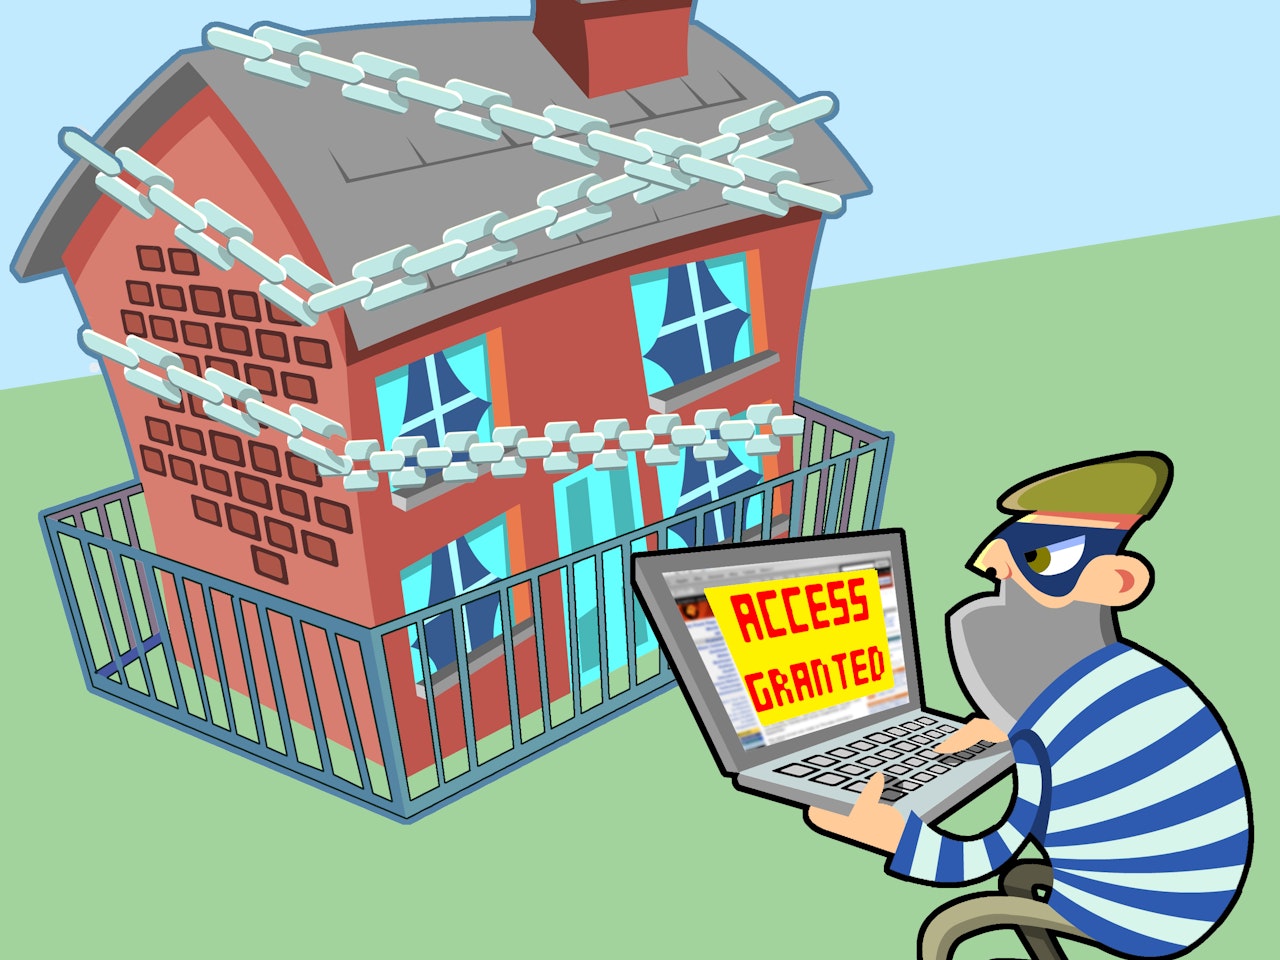 funny happy humorous comical colourful graphic cartoon  Security burglar robber robbery  internet online fraud chains house home